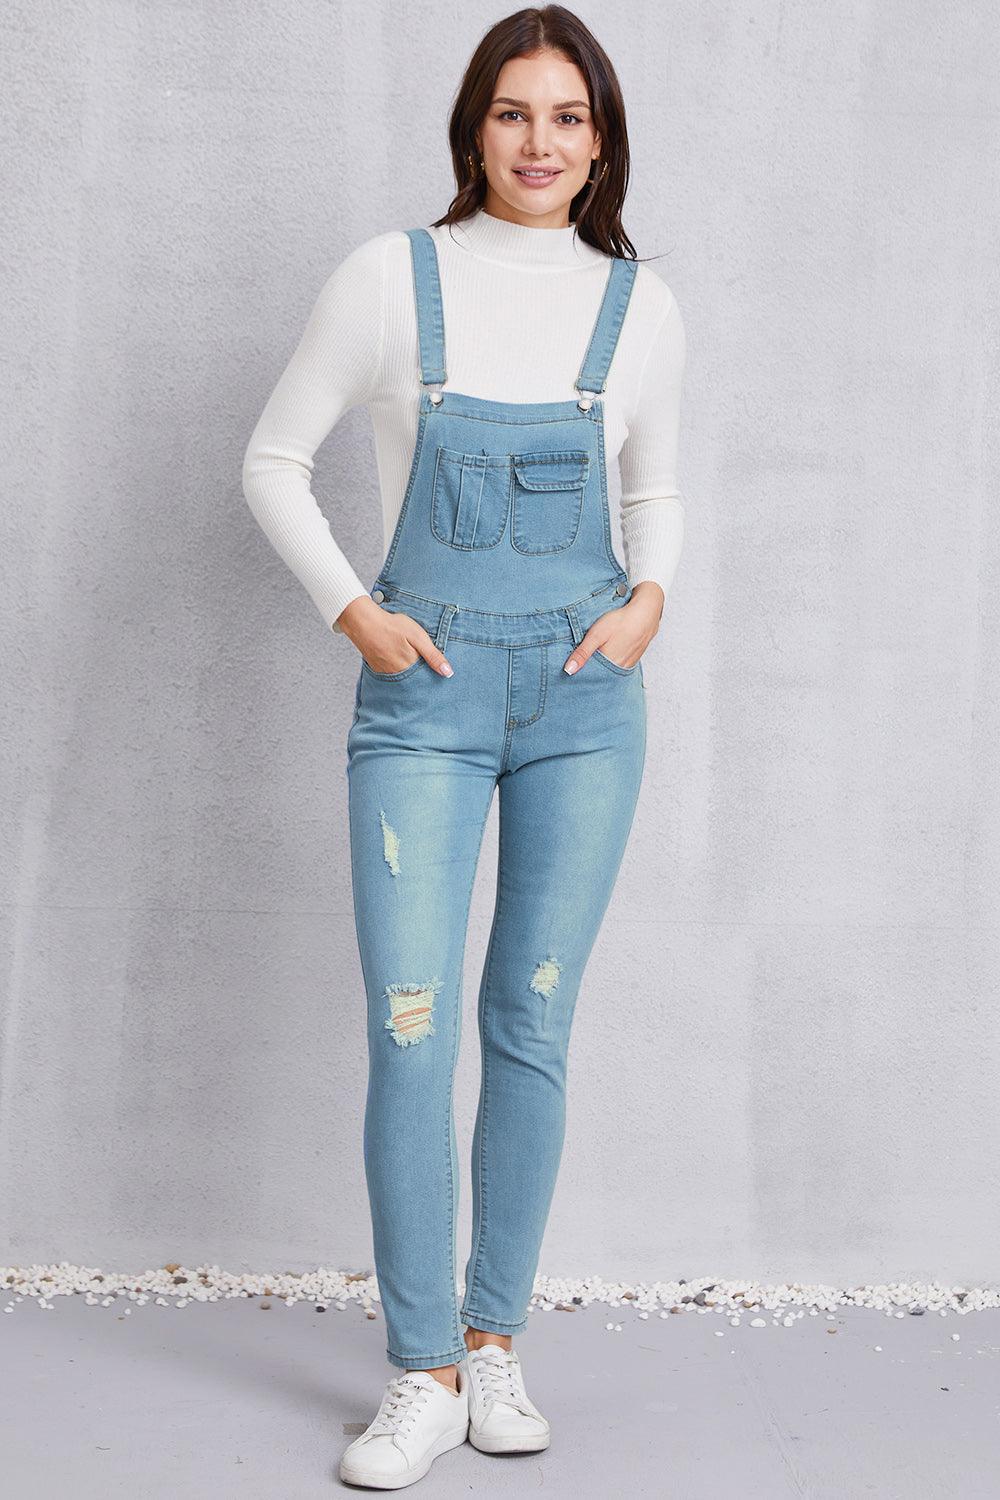 Distressed Washed Denim Overalls with Pockets - Lucianne Boutique